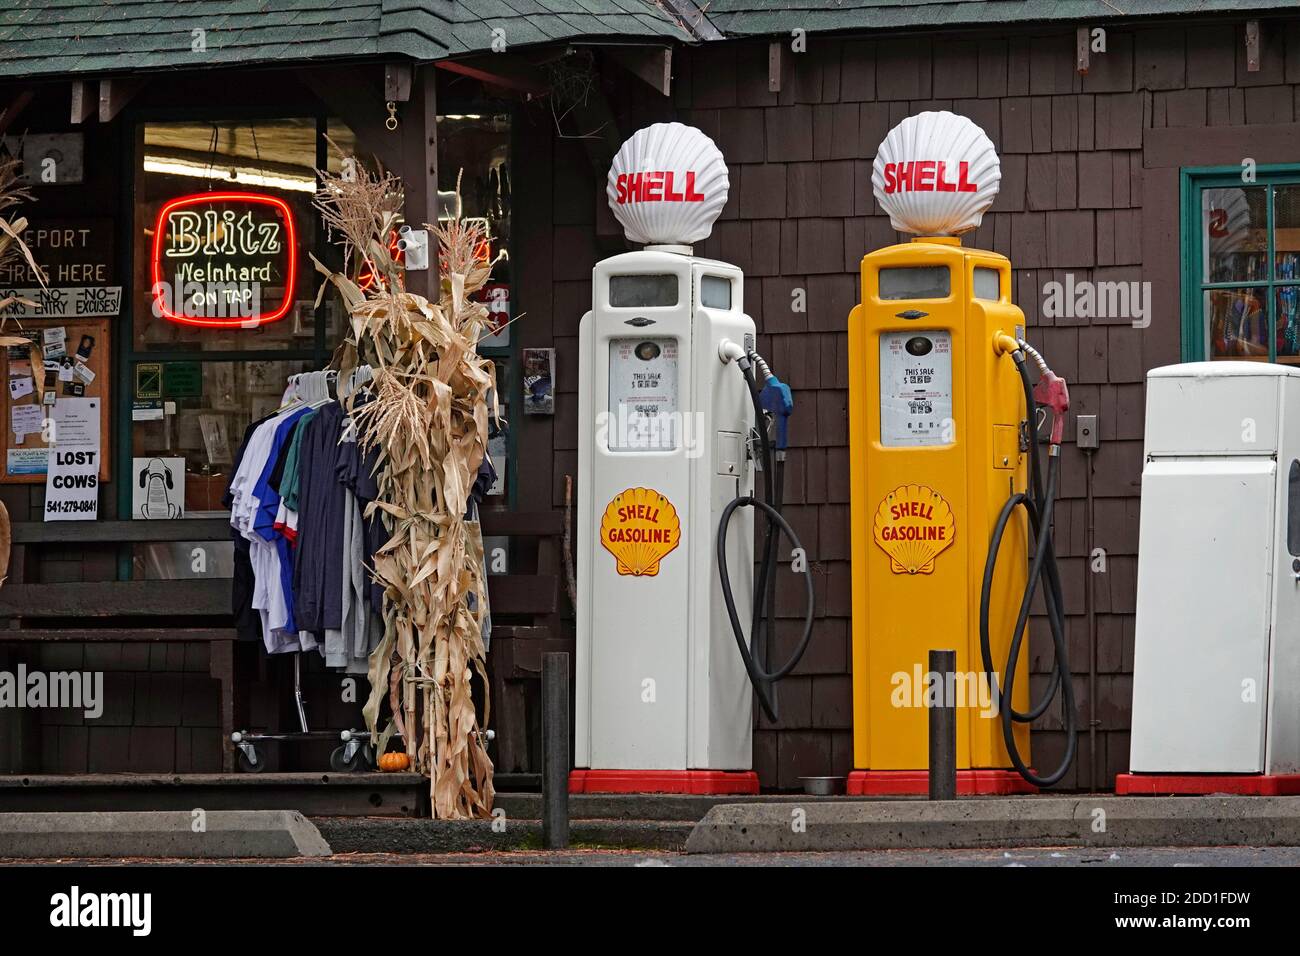 A pair of antique, vintage gasoline pumps, sitting in front of a country store in rural Oregon. The pumnps once sold Shell Gasoline. Stock Photo